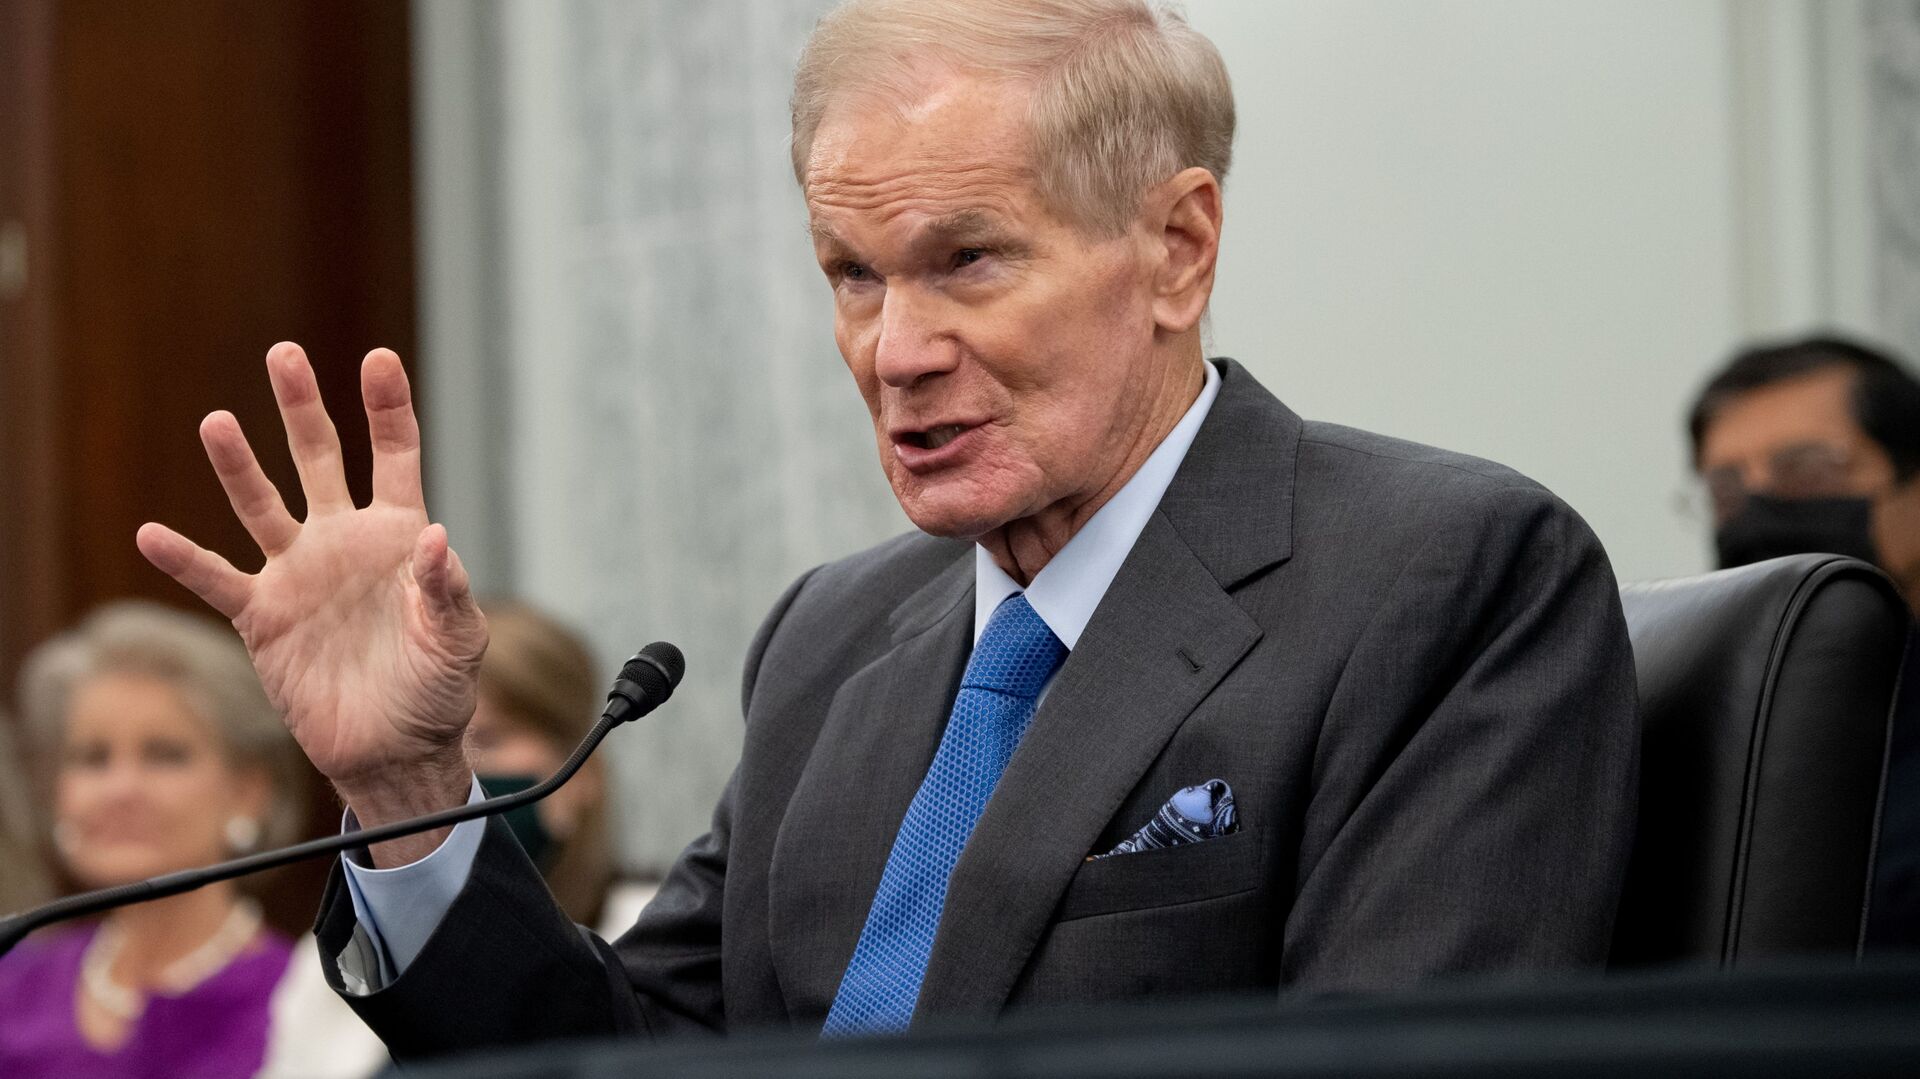 Former US Senator Bill Nelson, nominee to be administrator of NASA, testifies during a  Senate Committee on Commerce, Science, and Transportation confirmation hearing on Capitol Hill in Washington, DC, U.S. April 21, 2021. - Sputnik International, 1920, 29.04.2021